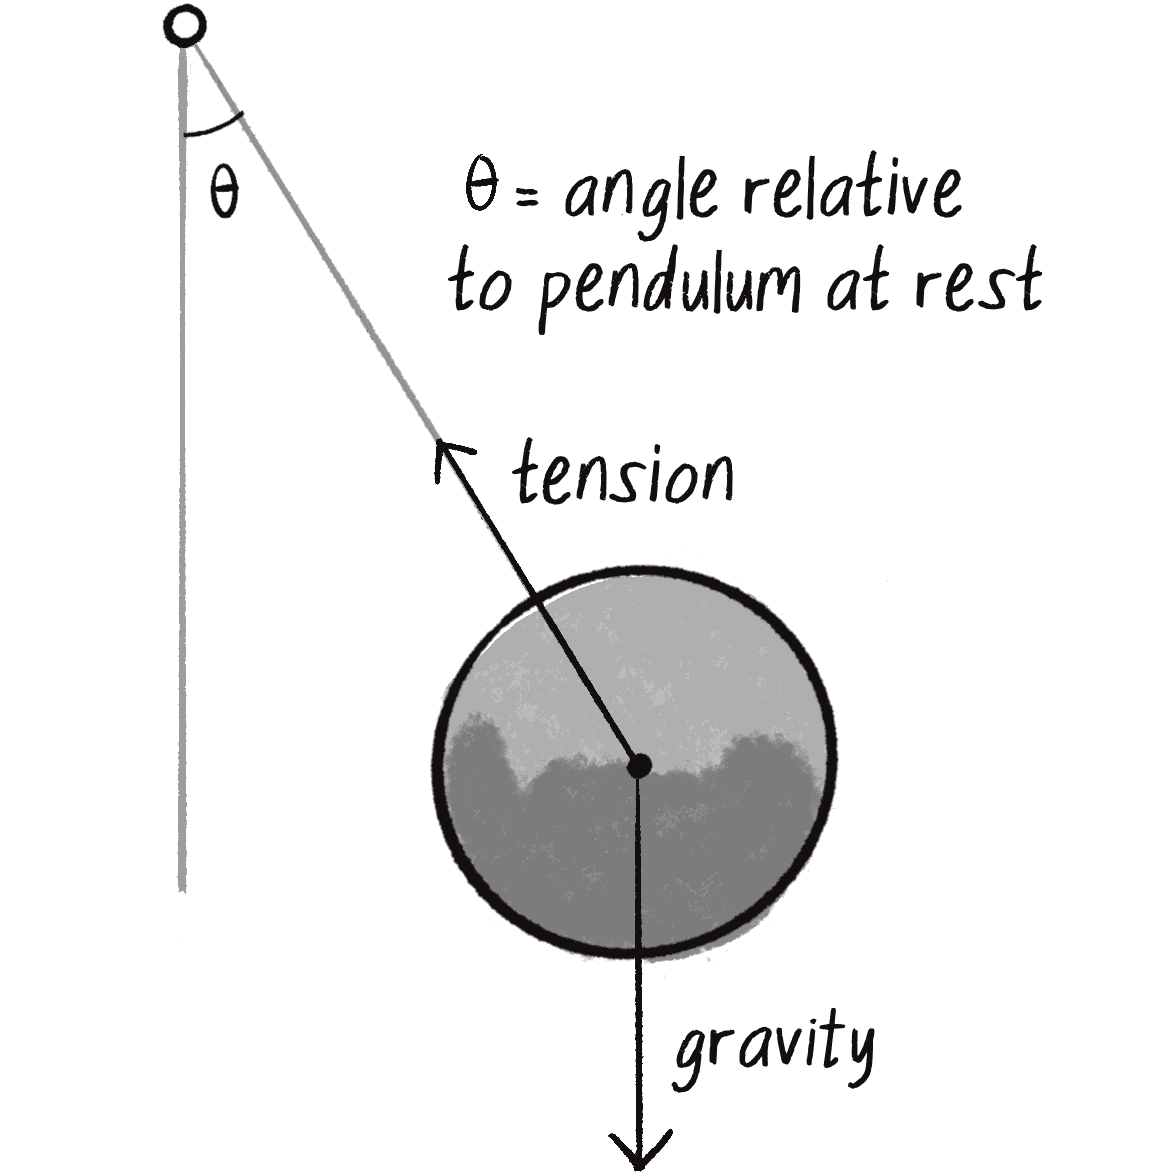 Figure 3.19: A pendulum showing \theta as the angle relative to its resting position